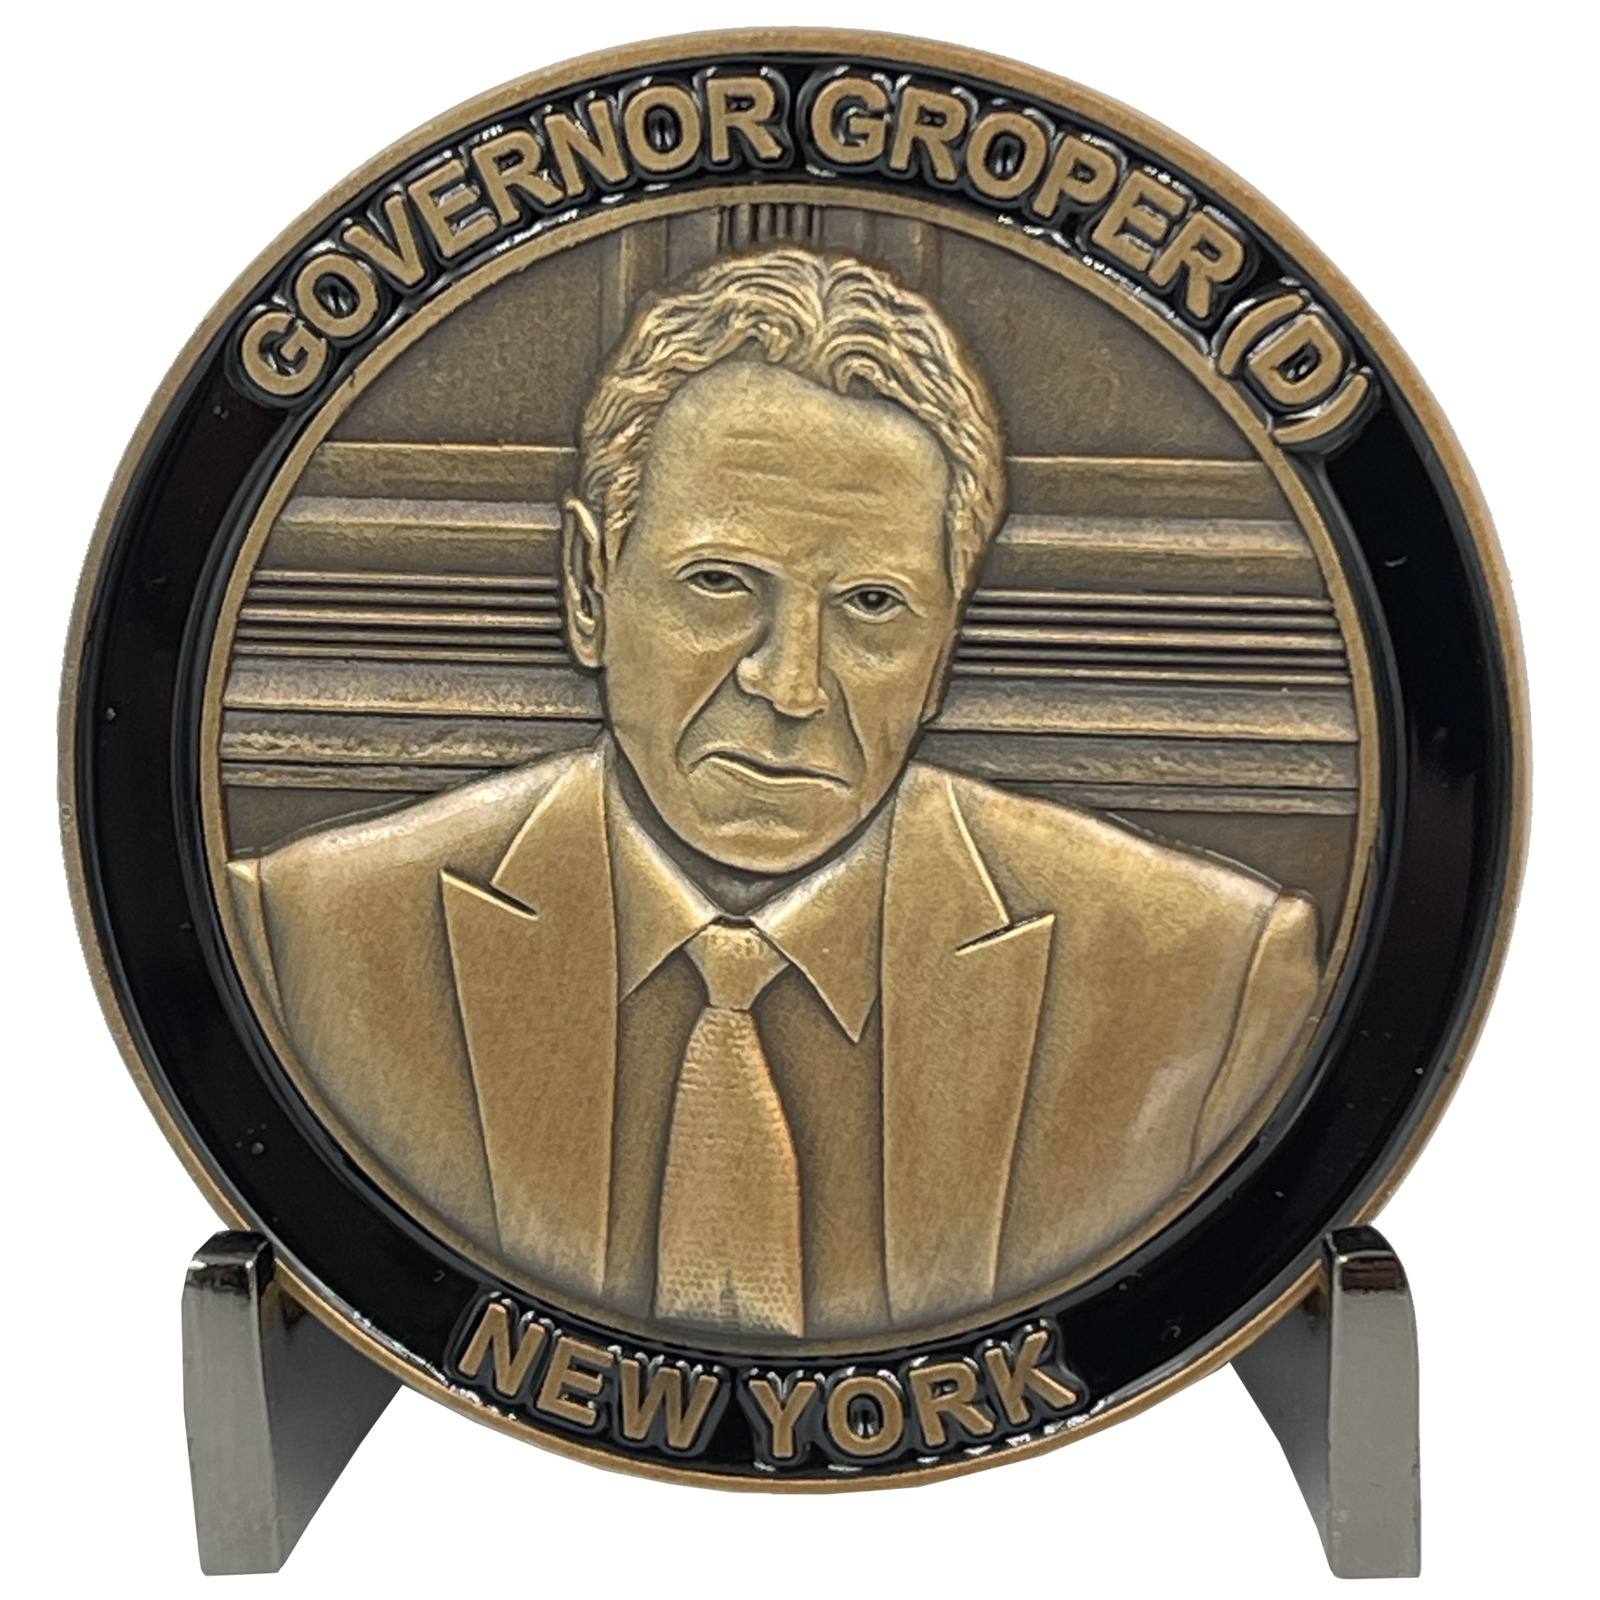 New York Governor Cuomo Scandal Challenge Coin BL7-003